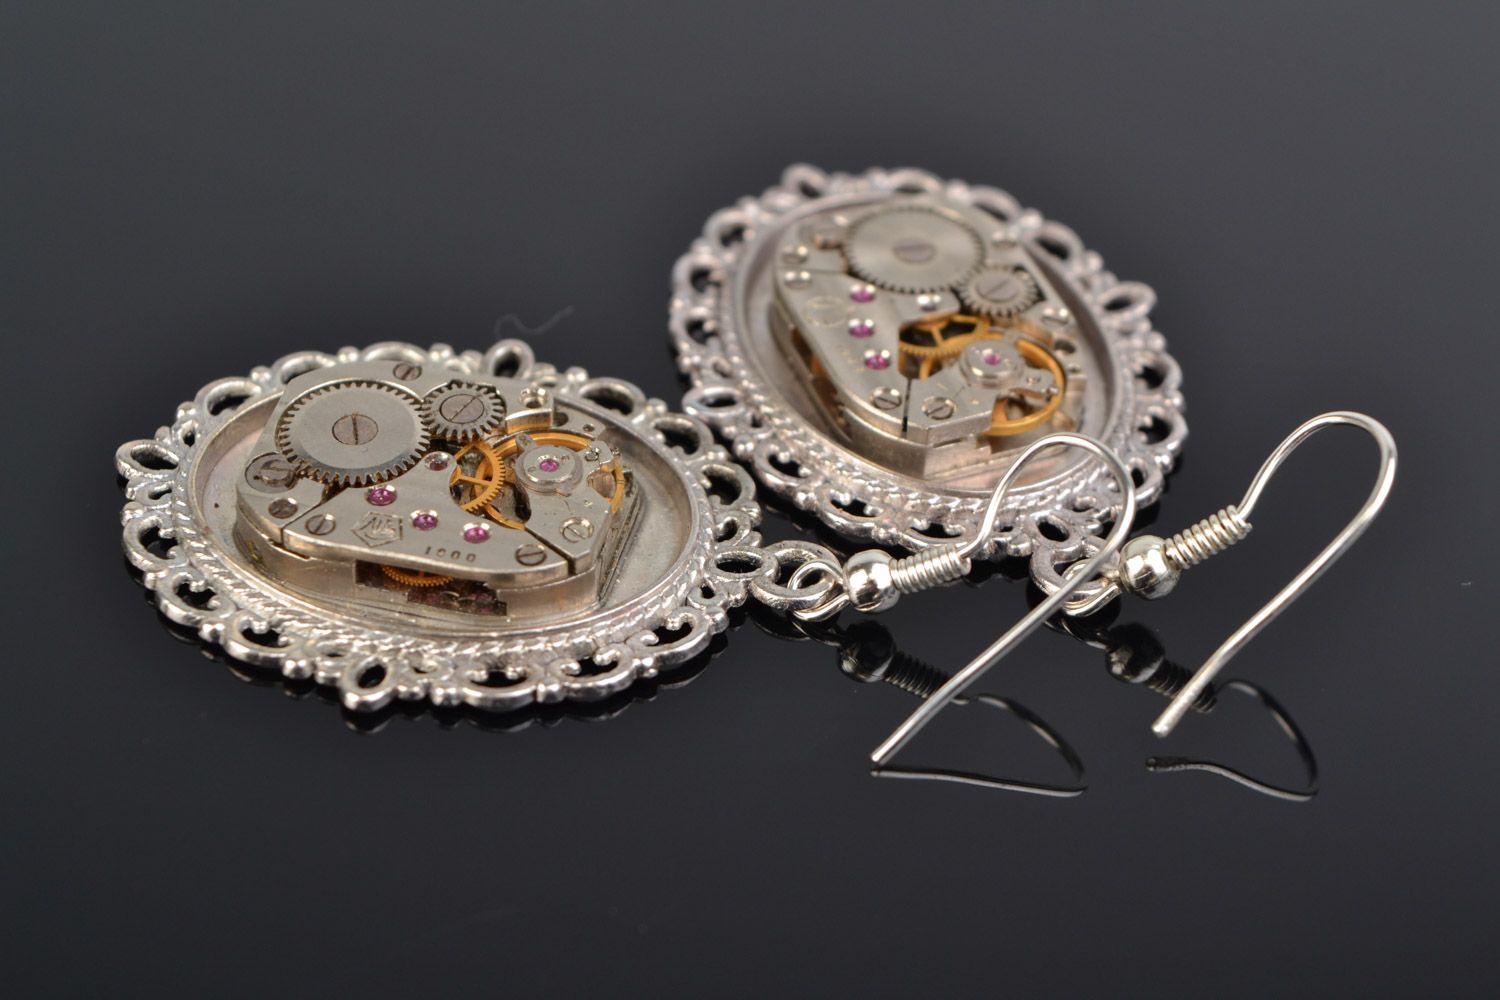 Handmade designer steampunk earrings with lace metal basis and clock mechanism photo 1